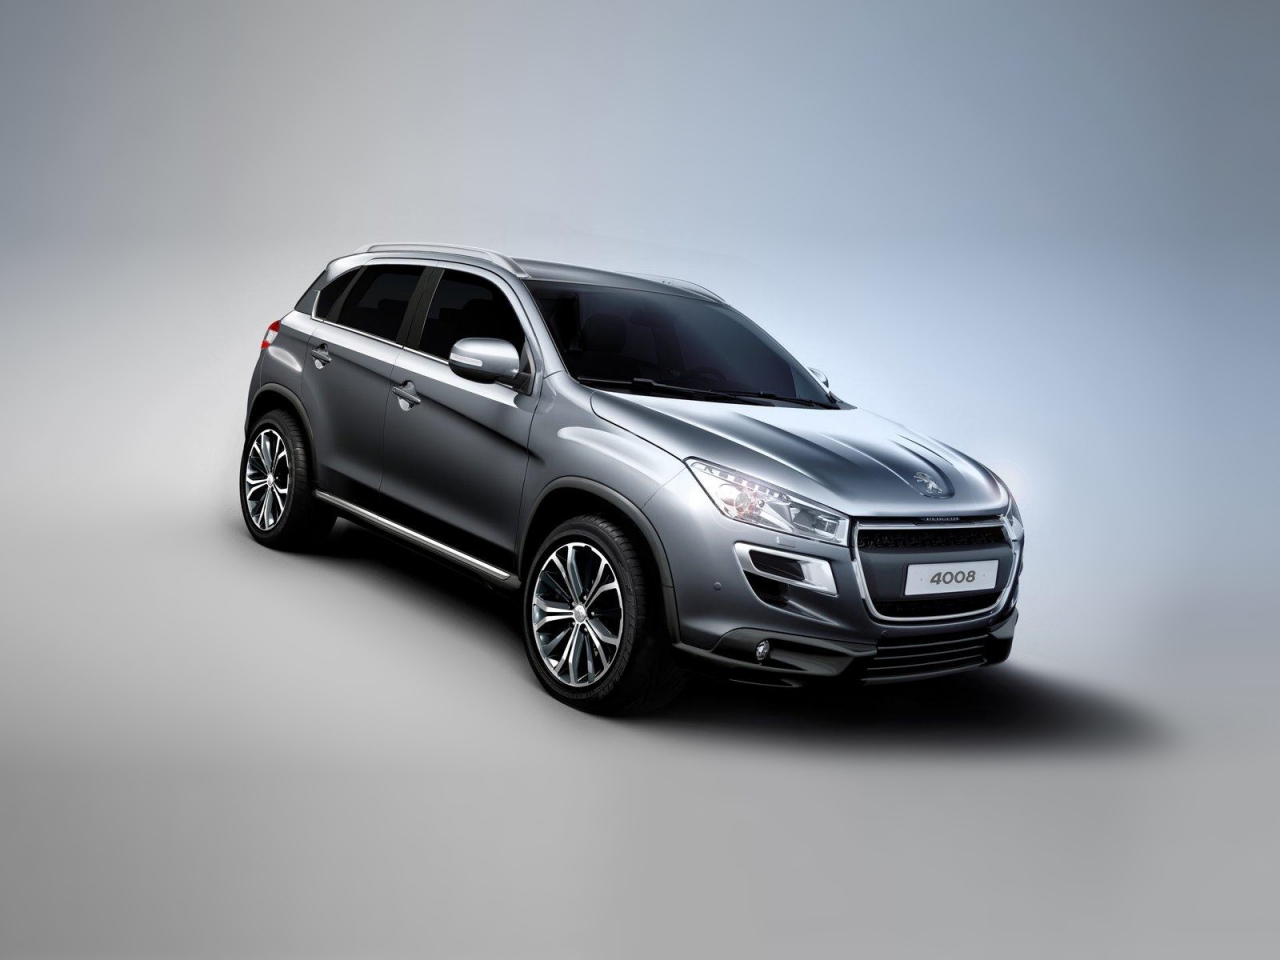 2012 Peugeot 4008 Grey for 1280 x 960 resolution